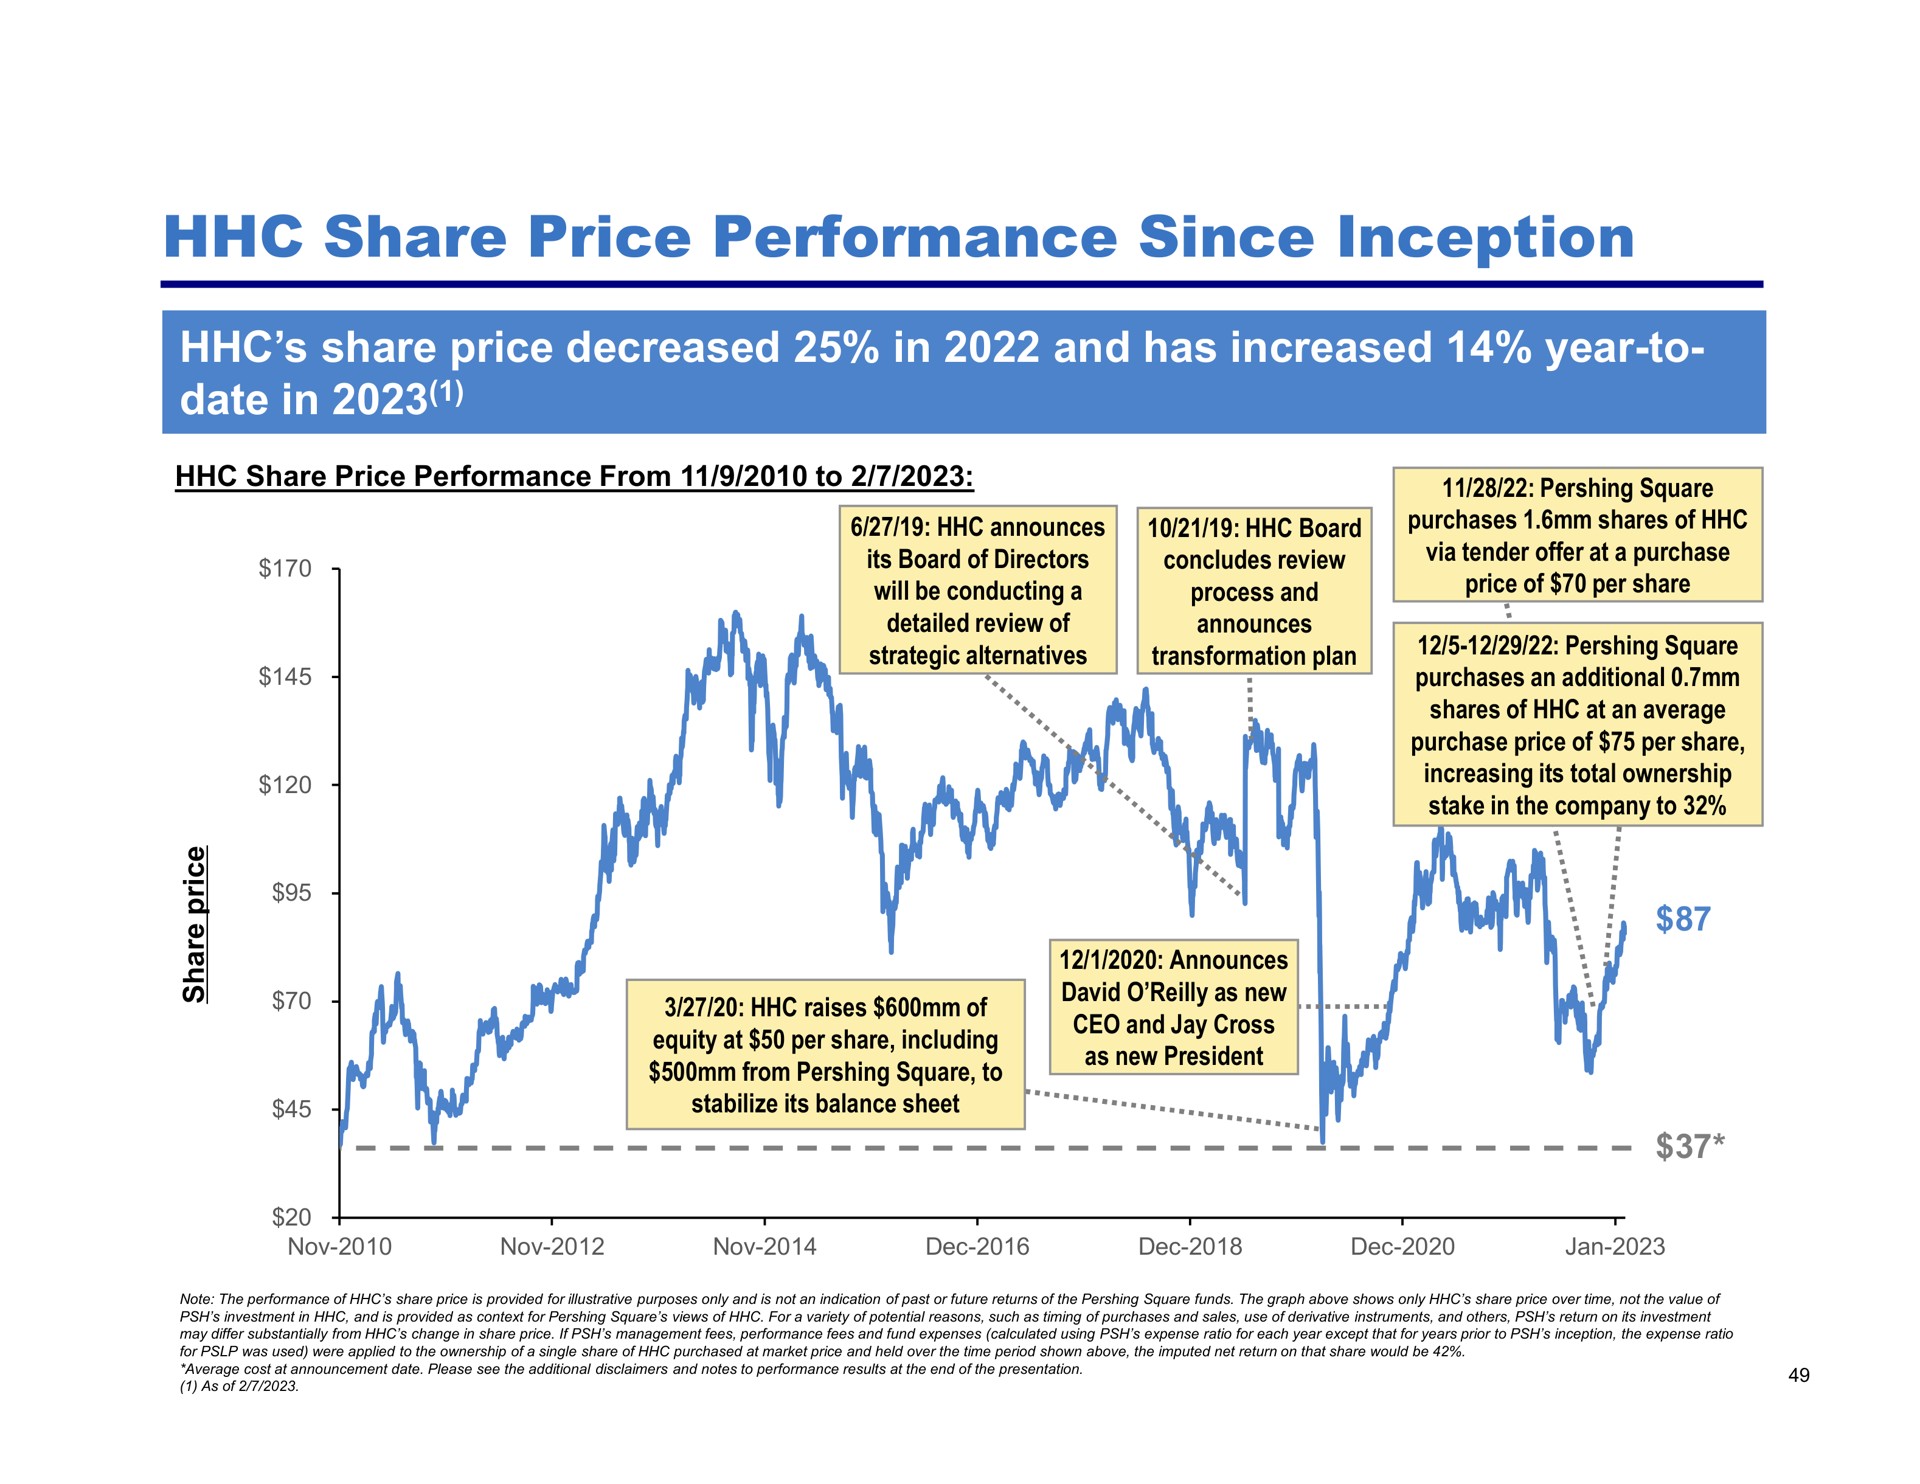 share price performance since inception share price decreased in and has increased year to date in raises of as new | Pershing Square